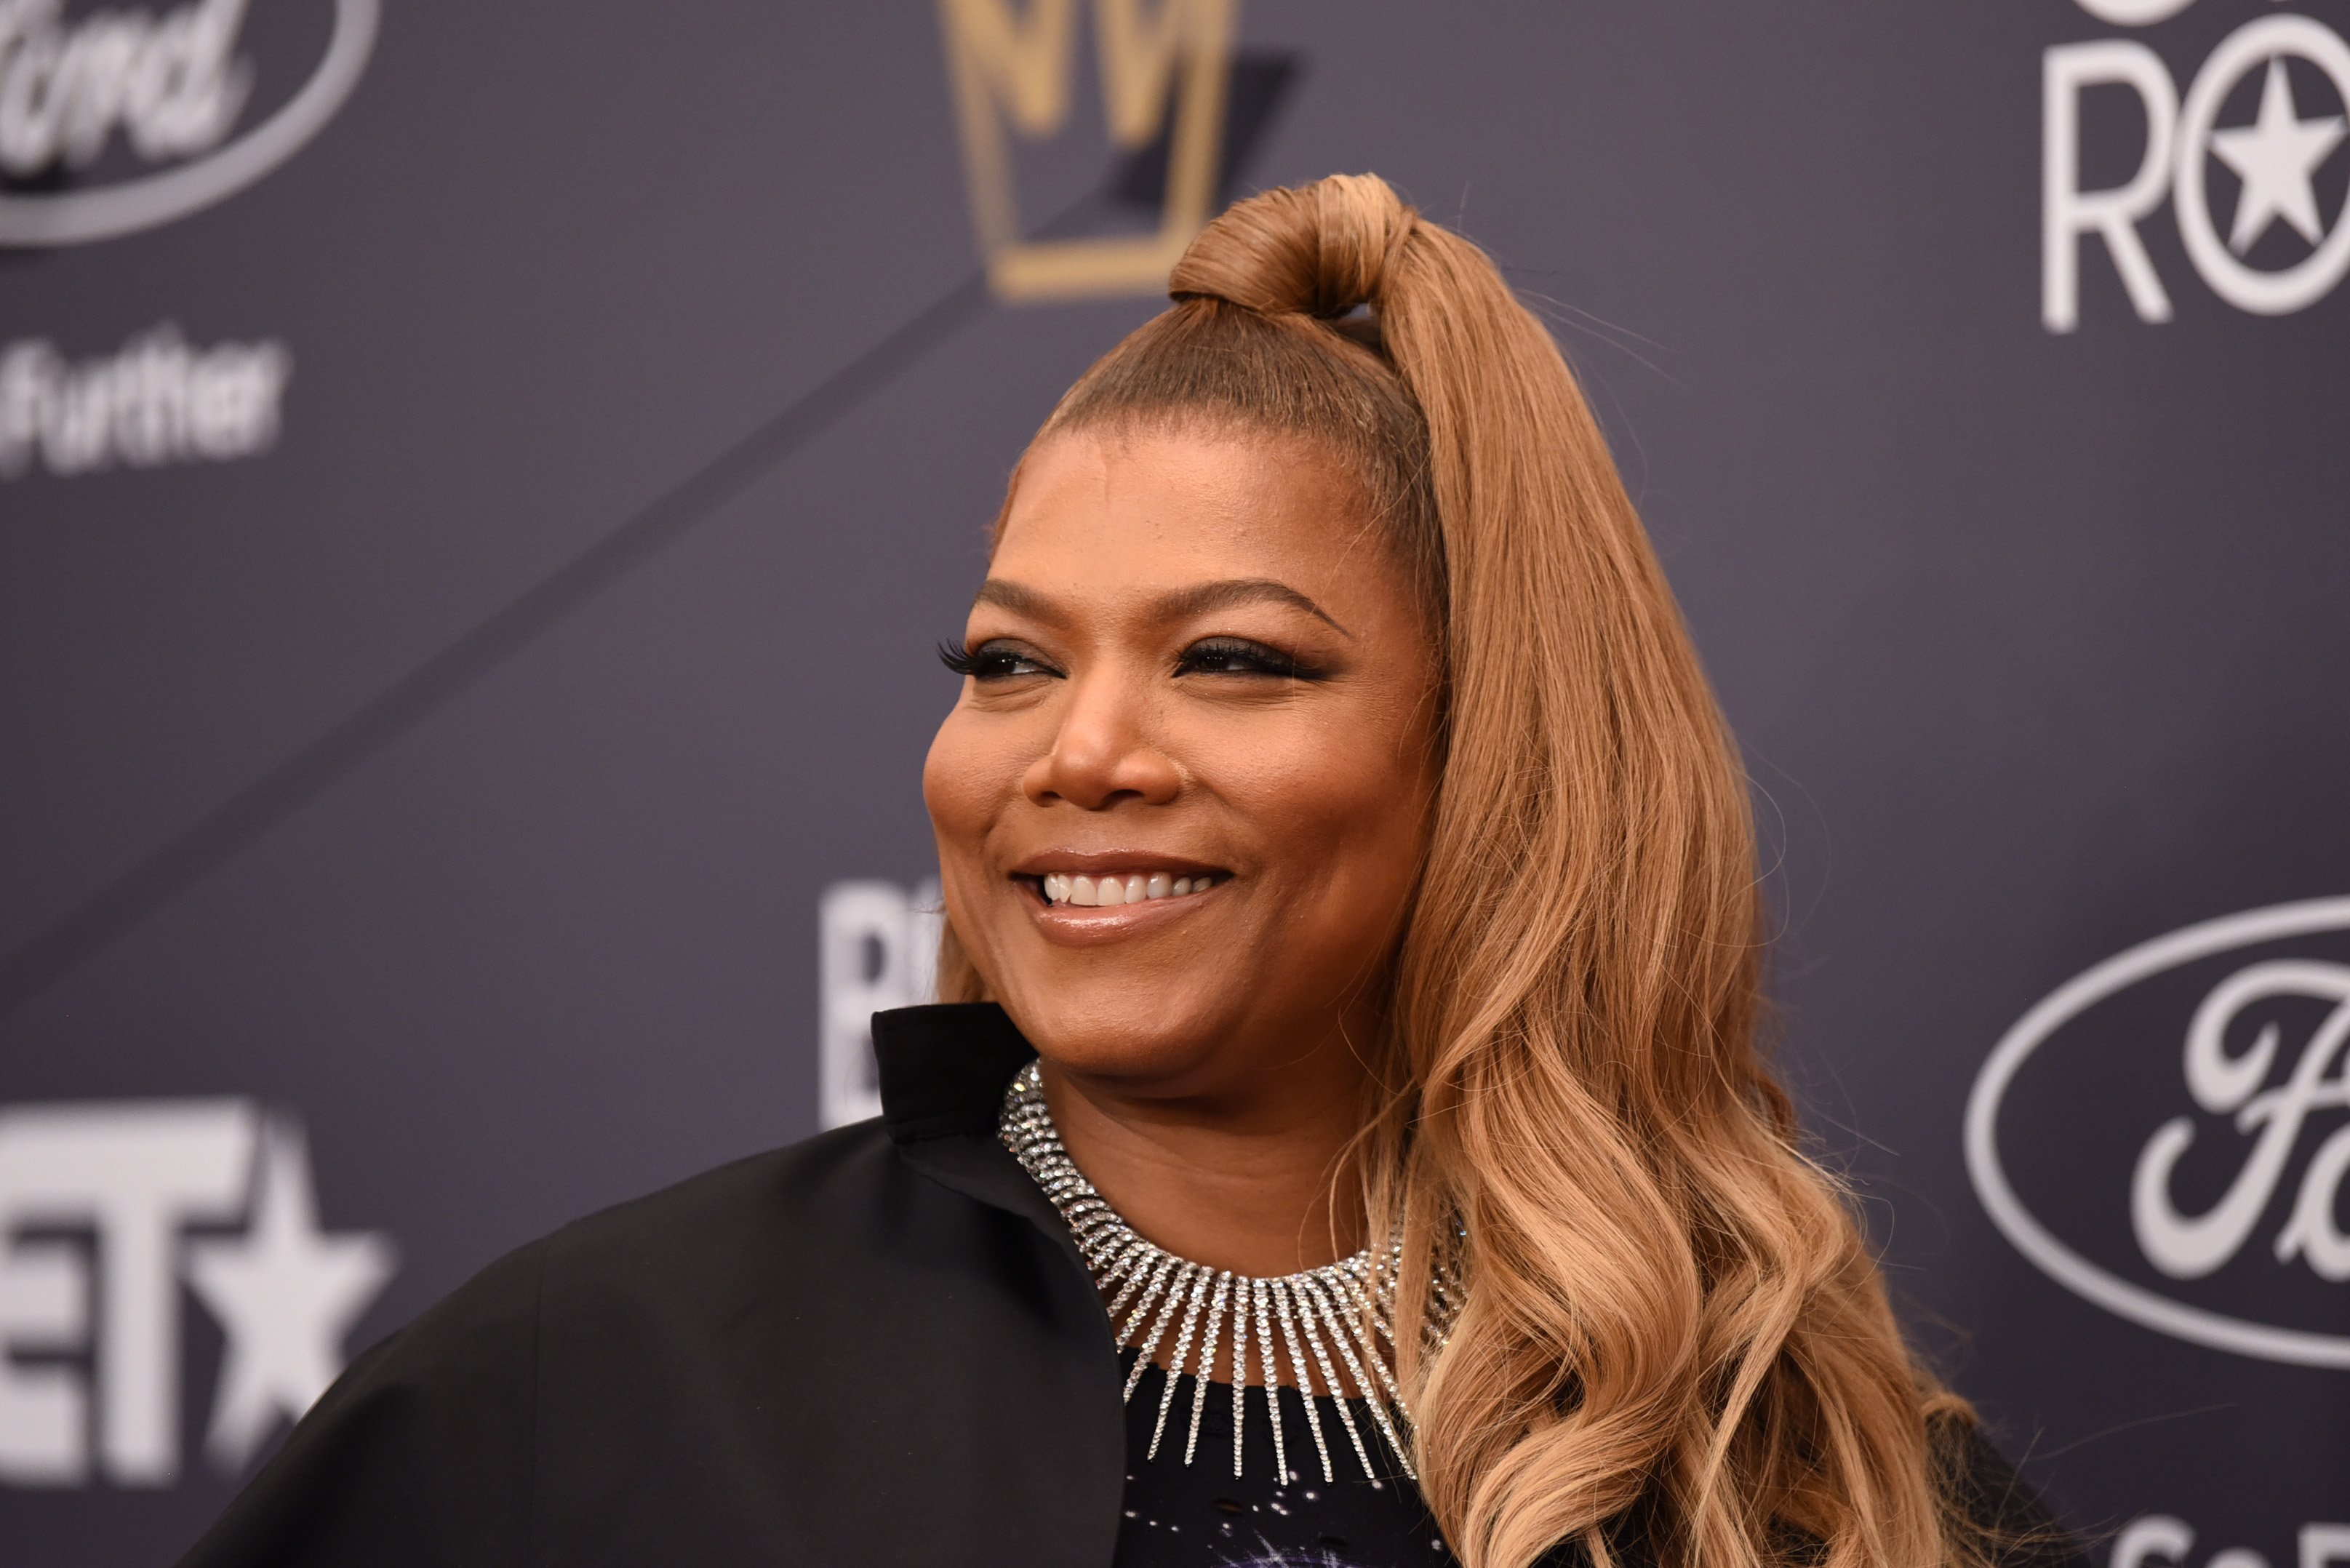 Rapper turned film star turned philanthropist Queen Latifah at the 2018 "Black Girls Rock!" red carpet. | Photo: Getty Images